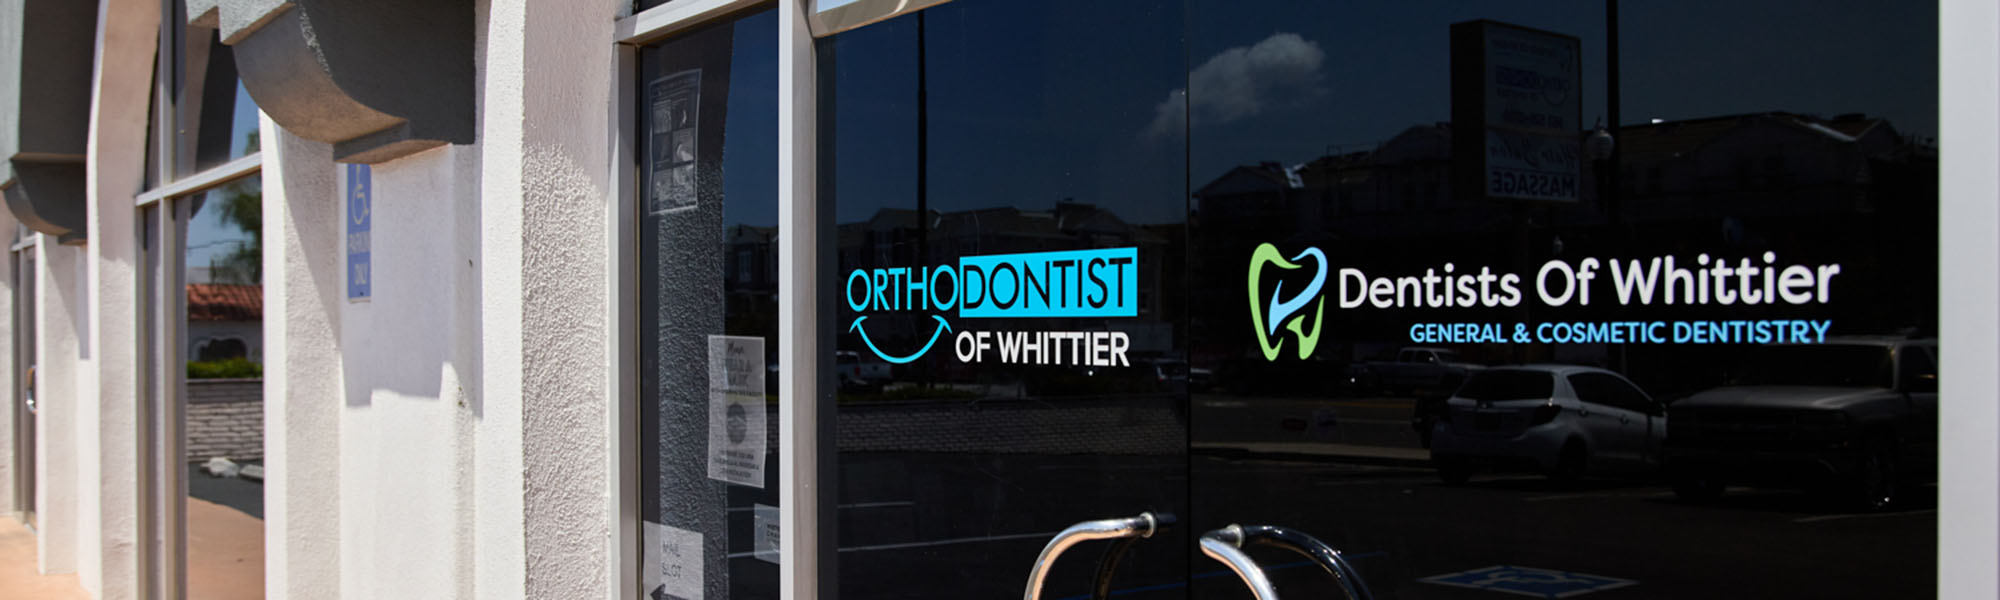 Contact Dentists of Whittier